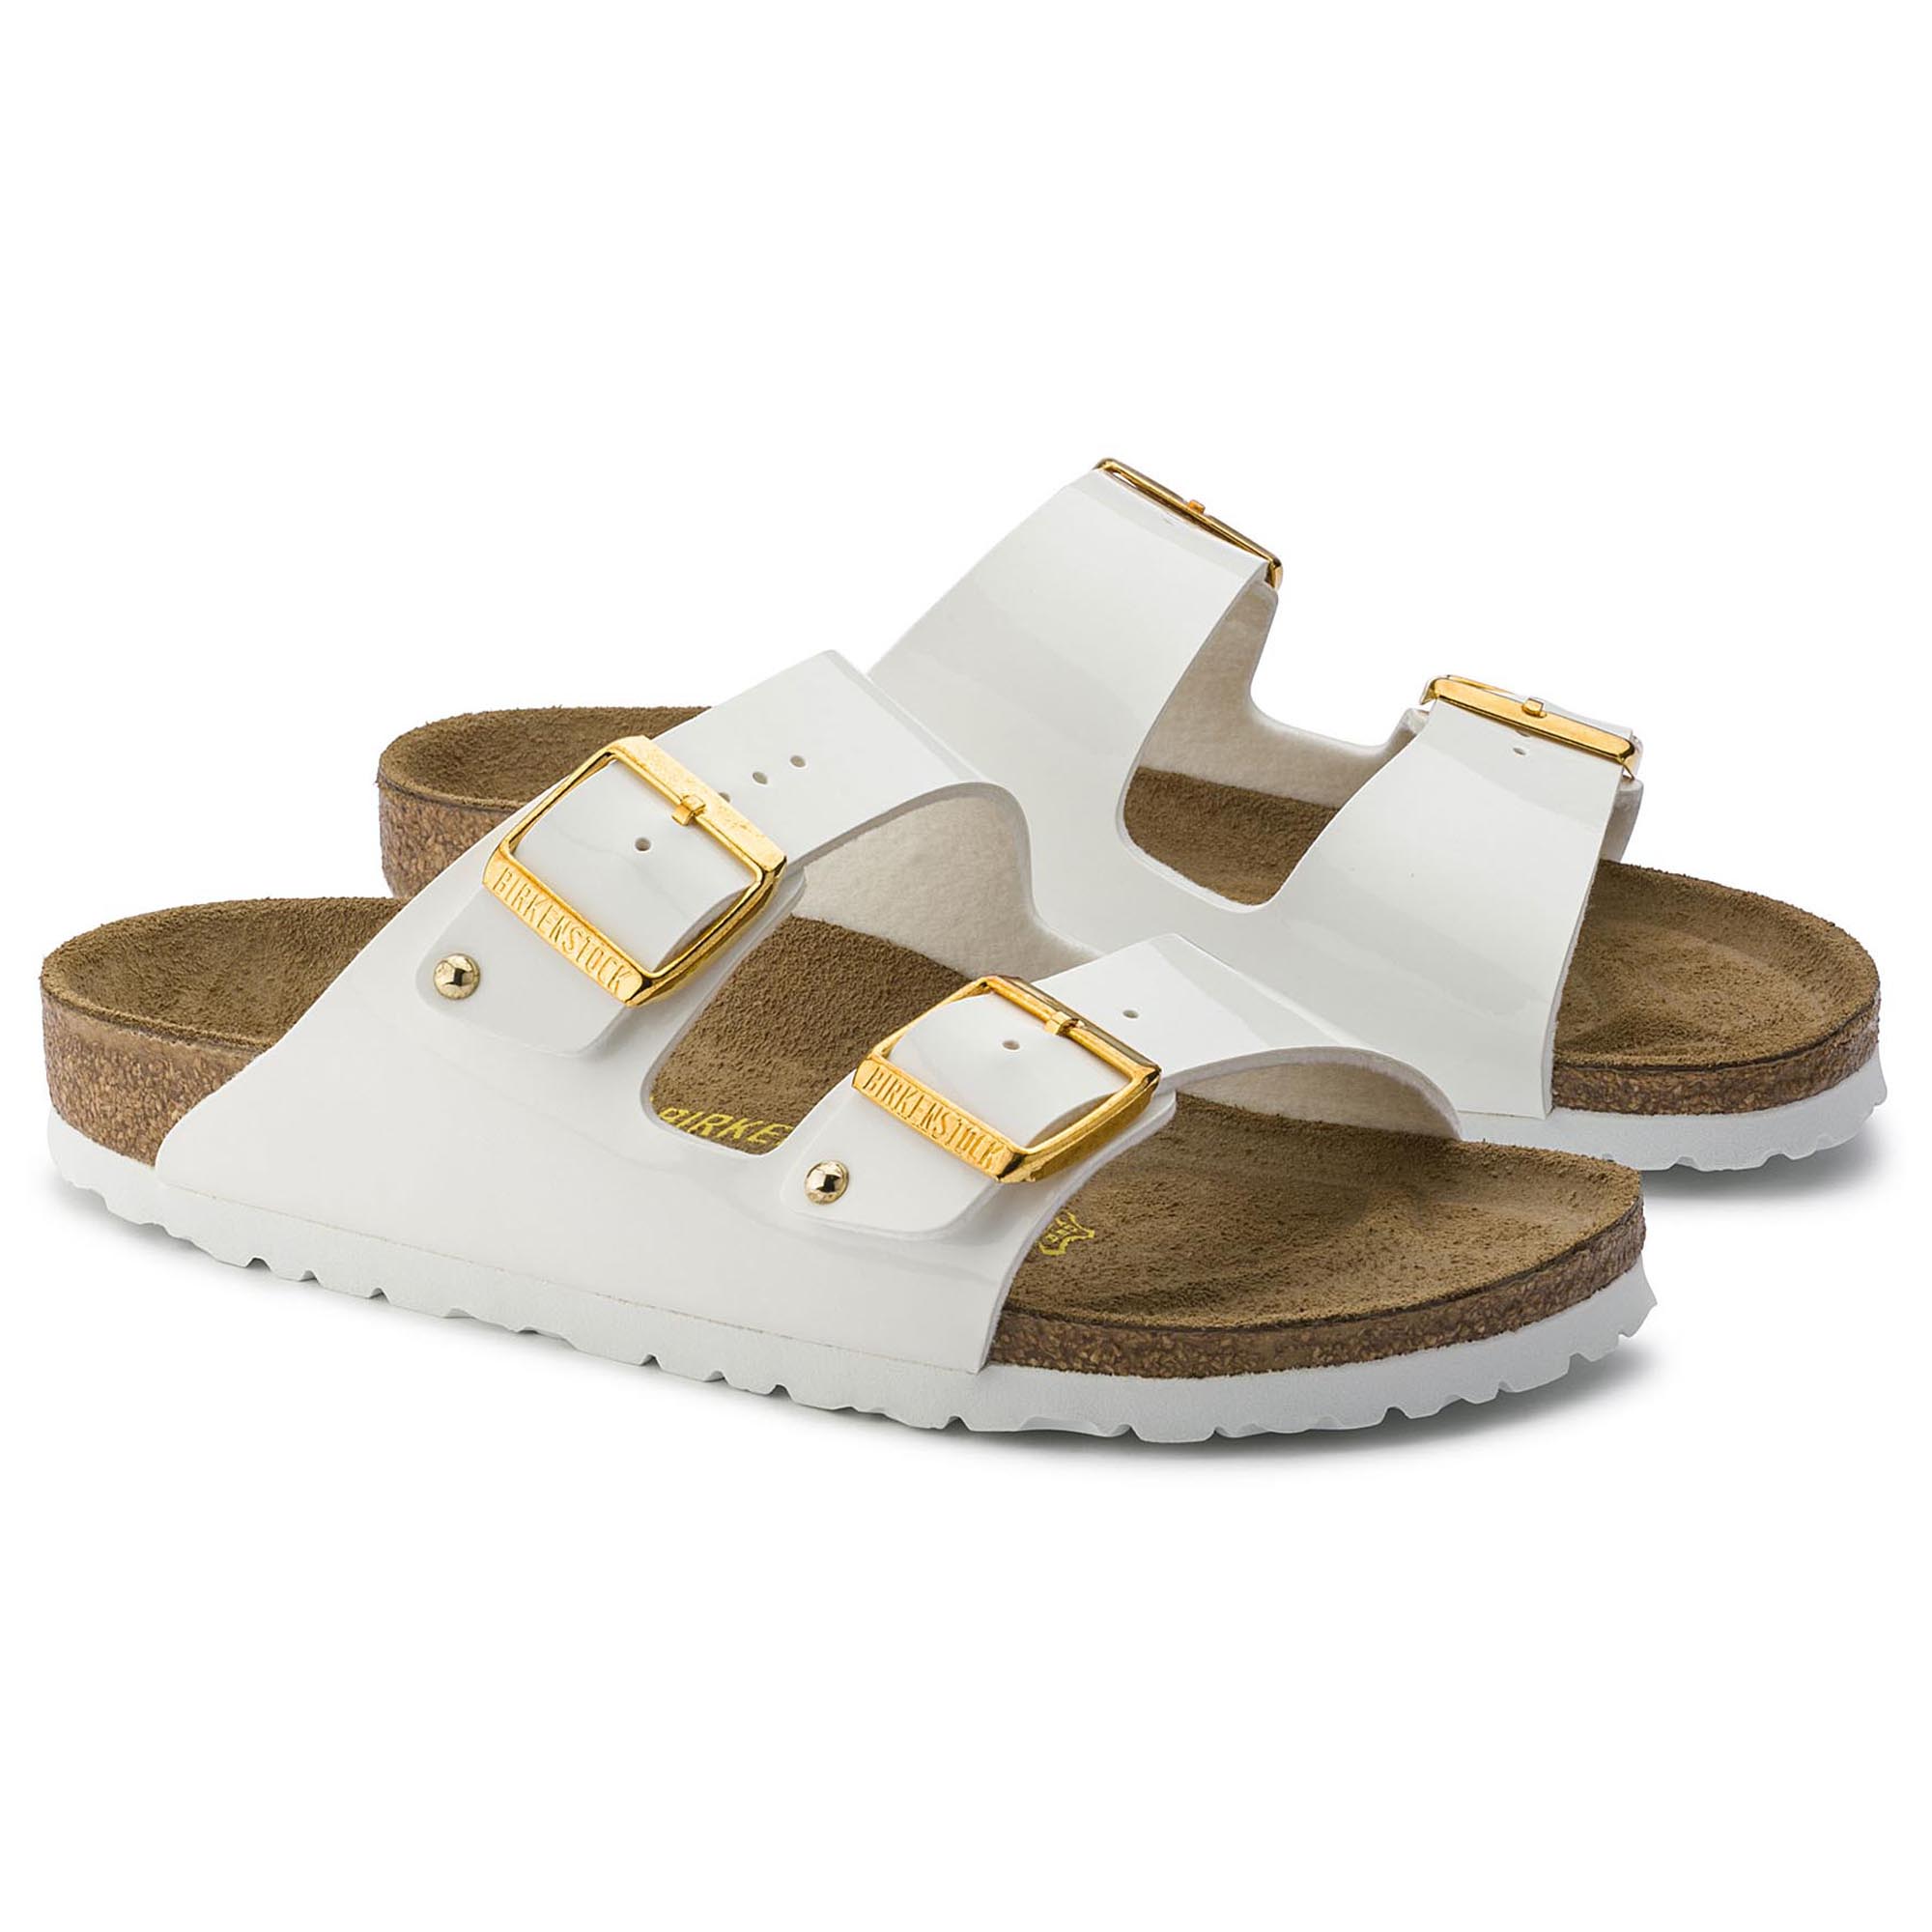 white birkenstocks with gold buckles